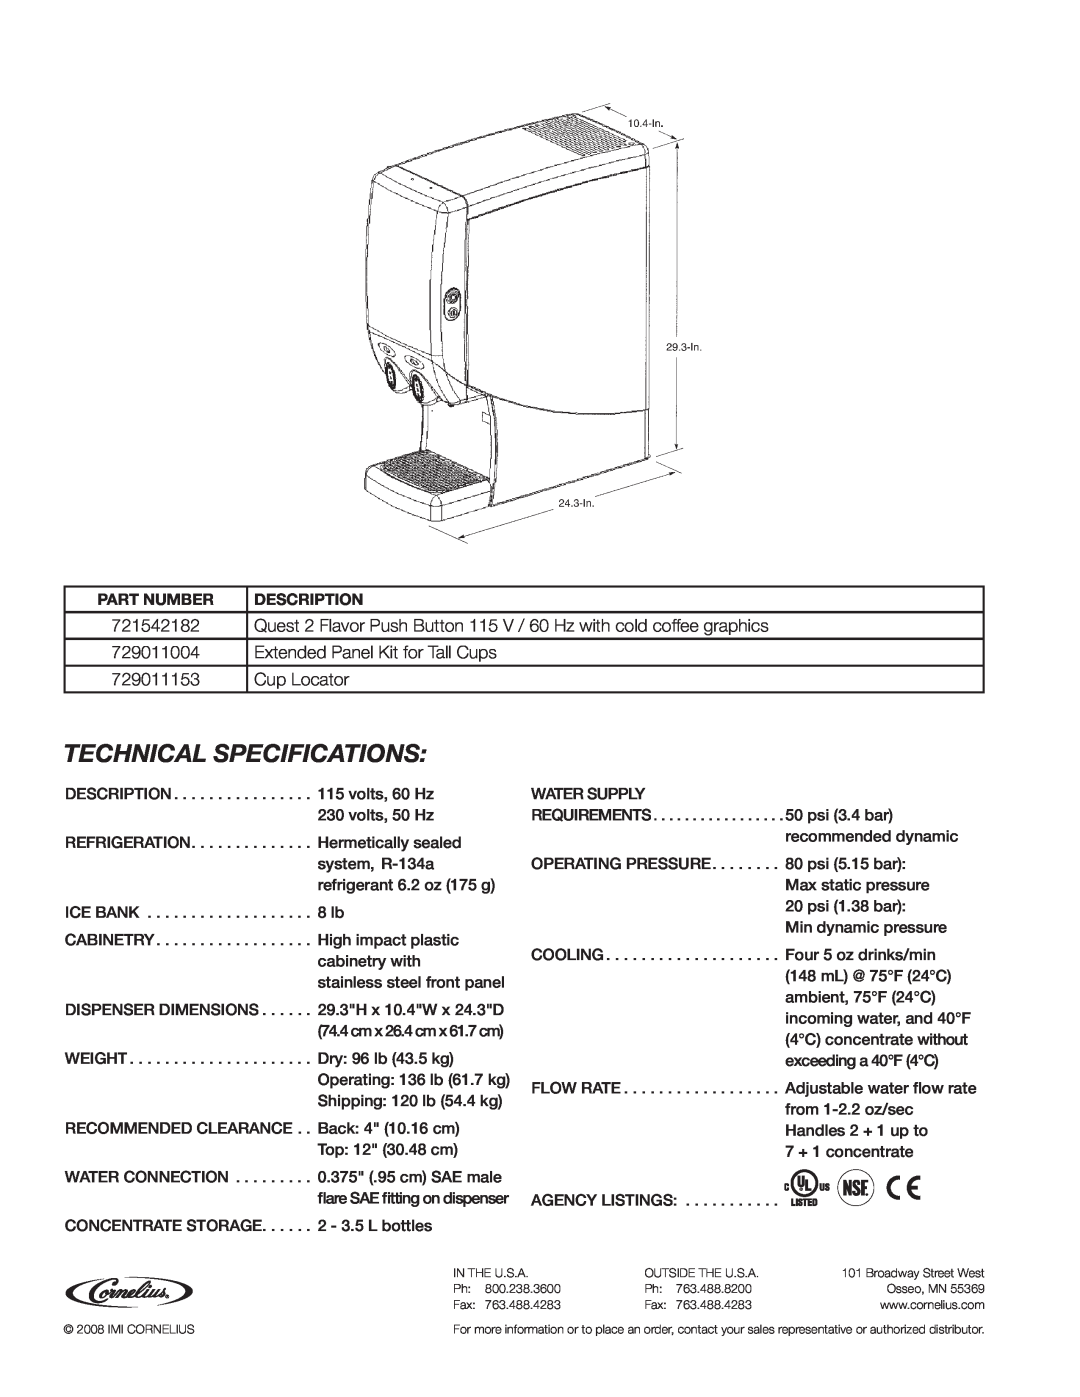 Cornelius Quest 2000 manual Technical Specifications, 721542182, 729011004, Extended Panel Kit for Tall Cups, 729011153 